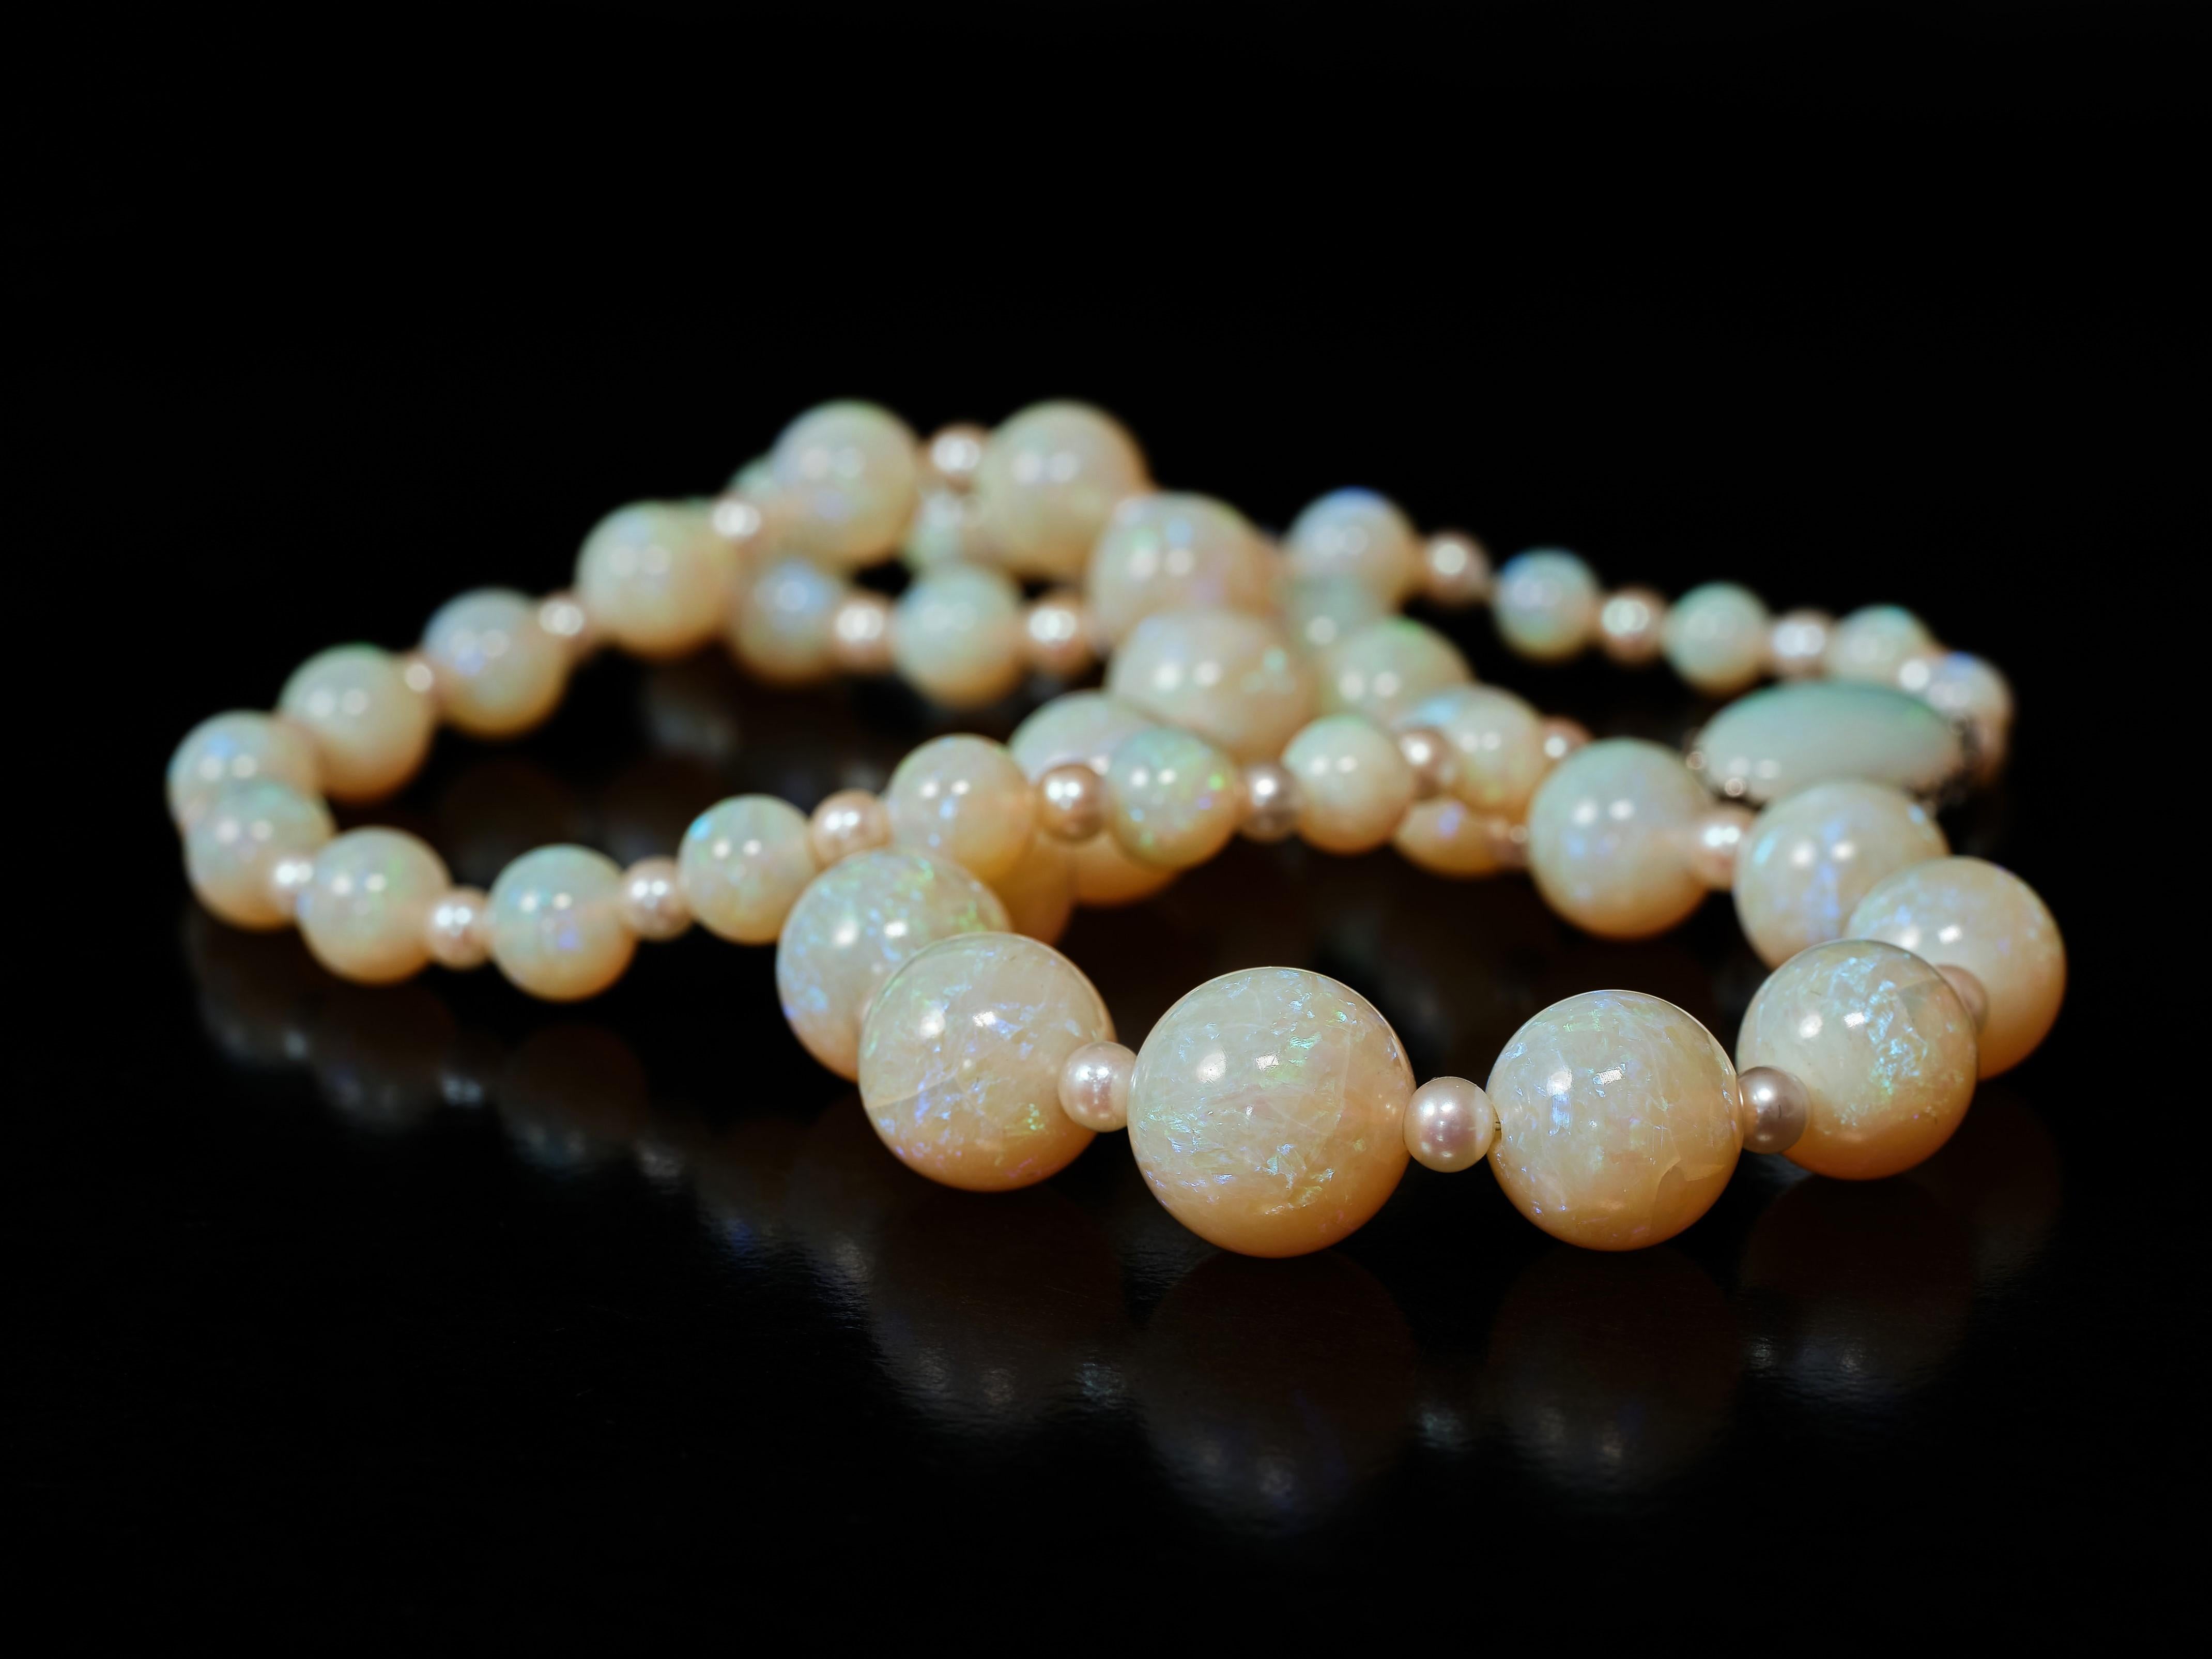 42 beautiful, gently graduated, multi-chromatic opal beads imbued with lightening flashes, alternate with small even sized pearls to create this enchanting necklace. The beads are ranging from 5 millimeters to impressive 13 mm millimeters. It is